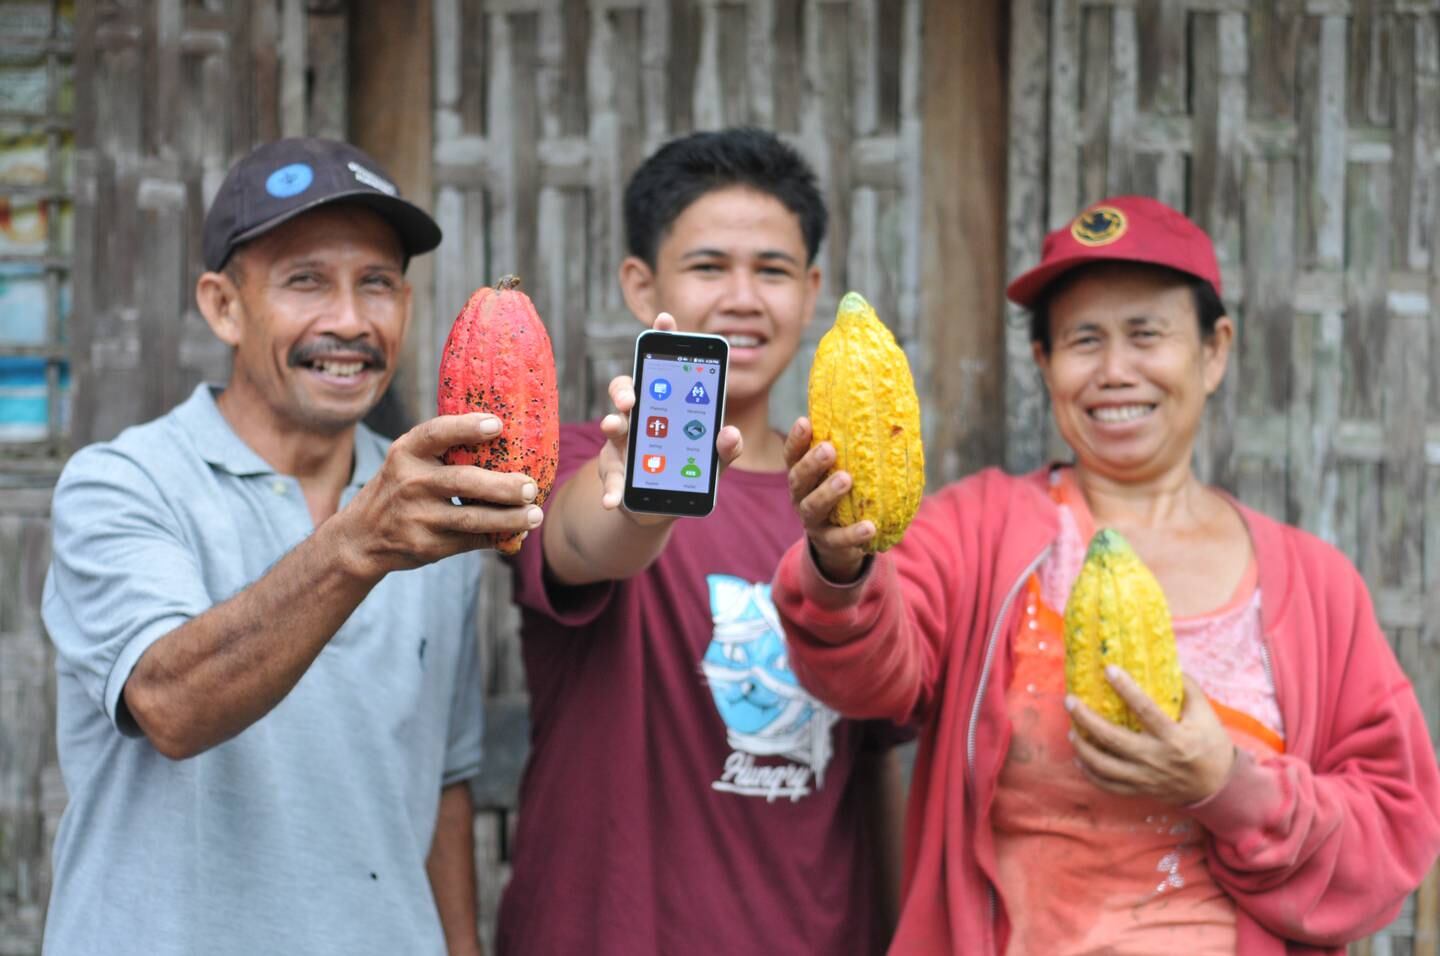 A cheap smartphone and app by AgUnity gives farmers in remote areas the chance to communicate, an opportunity many did not have before. Photo: Expo 2020 Dubai